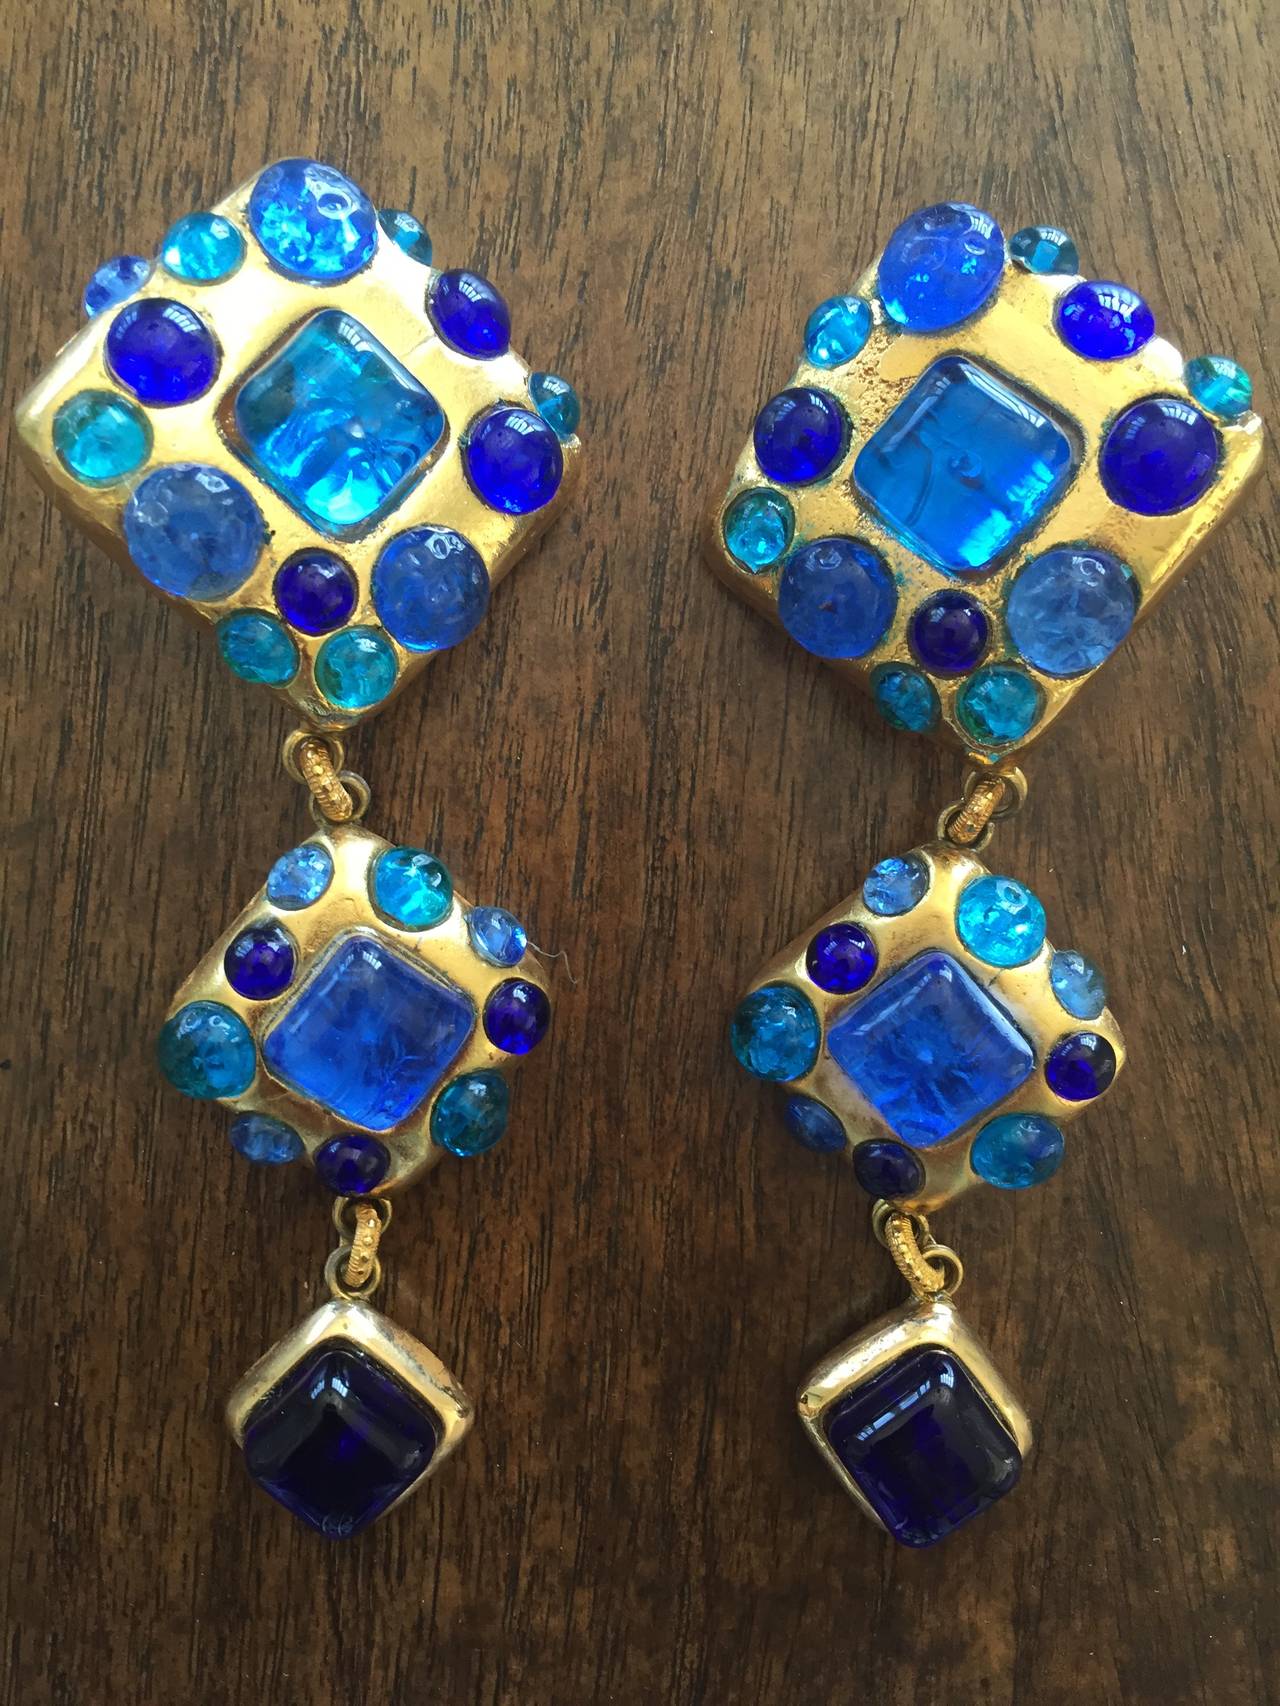 Dominique Aurientis Shoulder Duster Runway Earrings.
Clip backed, these feature three graduating drops studded with faux saphires.